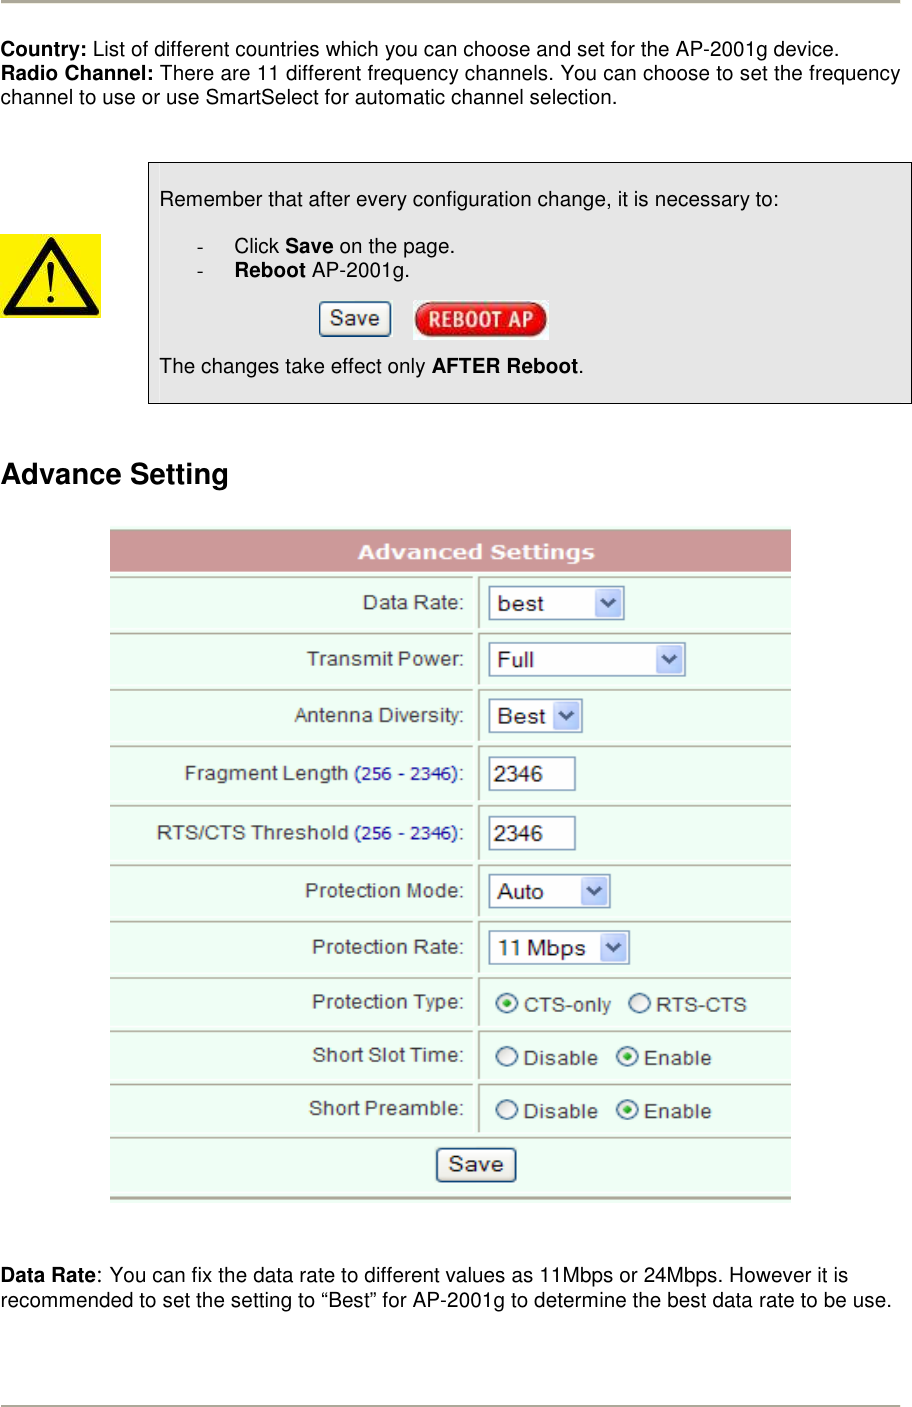        Country: List of different countries which you can choose and set for the AP-2001g device. Radio Channel: There are 11 different frequency channels. You can choose to set the frequency channel to use or use SmartSelect for automatic channel selection.         Remember that after every configuration change, it is necessary to:  -  Click Save on the page. - Reboot AP-2001g.        The changes take effect only AFTER Reboot.   Advance Setting     Data Rate: You can fix the data rate to different values as 11Mbps or 24Mbps. However it is recommended to set the setting to “Best” for AP-2001g to determine the best data rate to be use. 